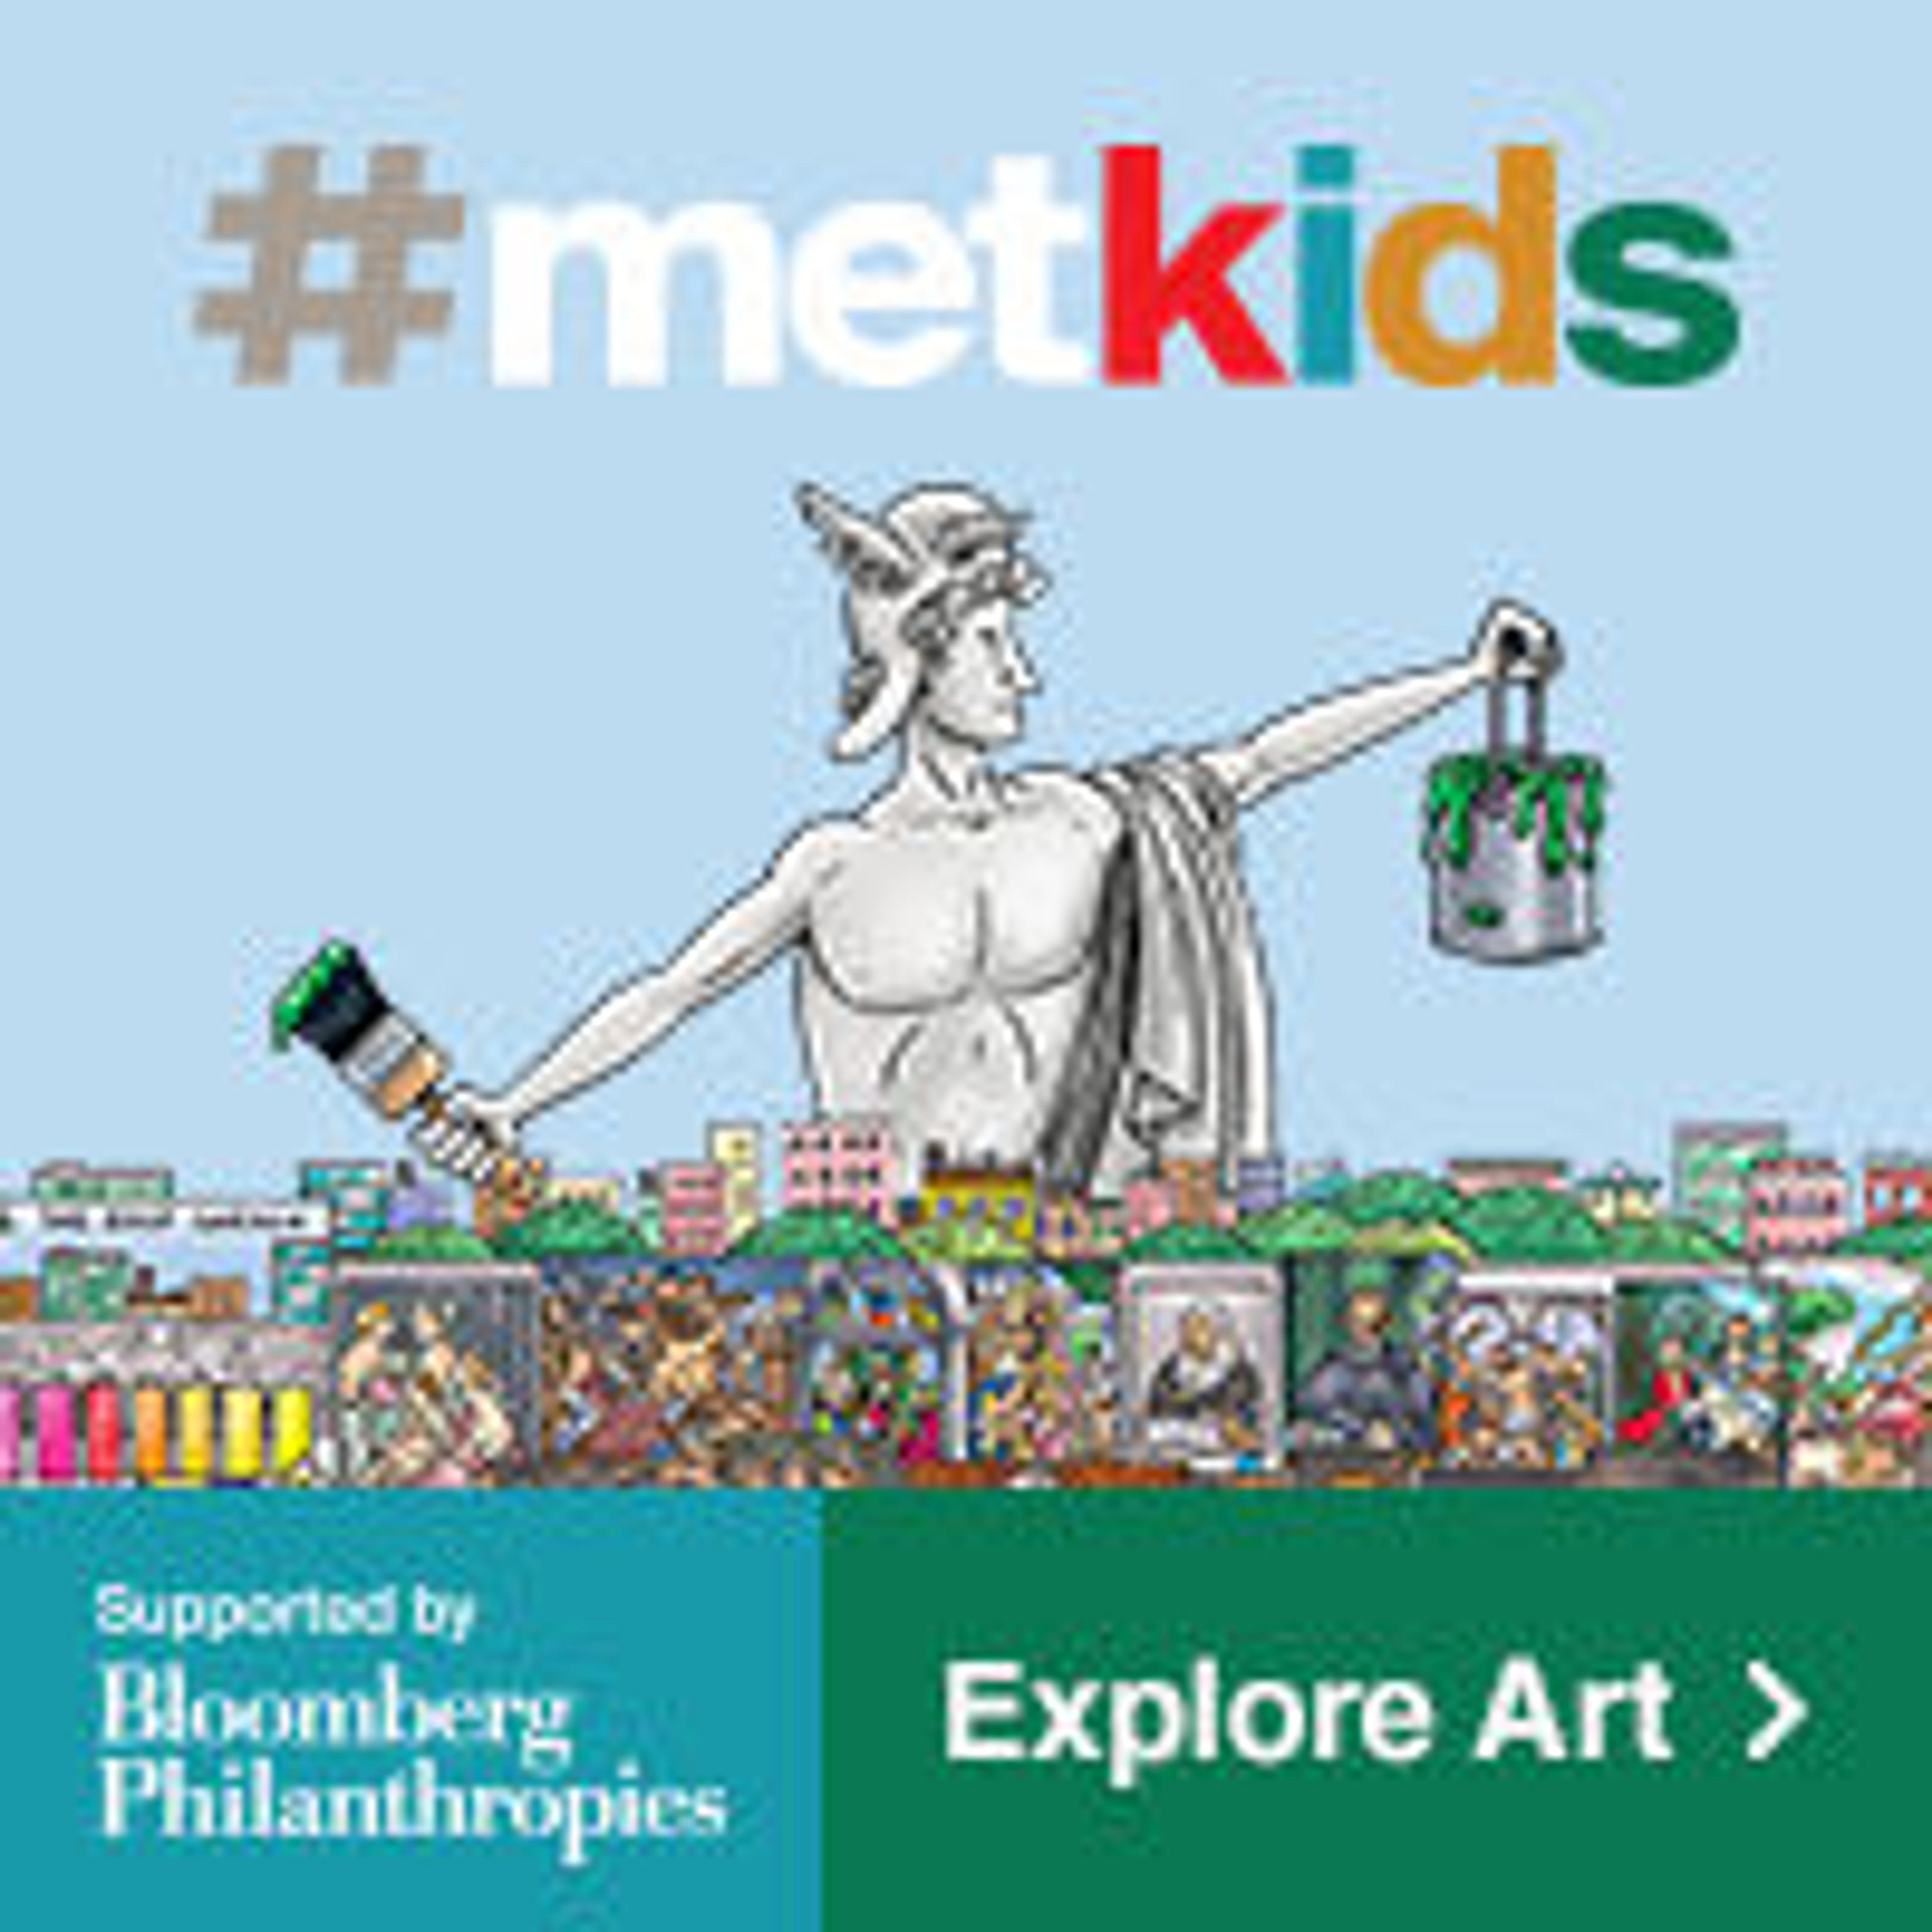 MetKids brand image of Greek hero Perseus holding up paint can